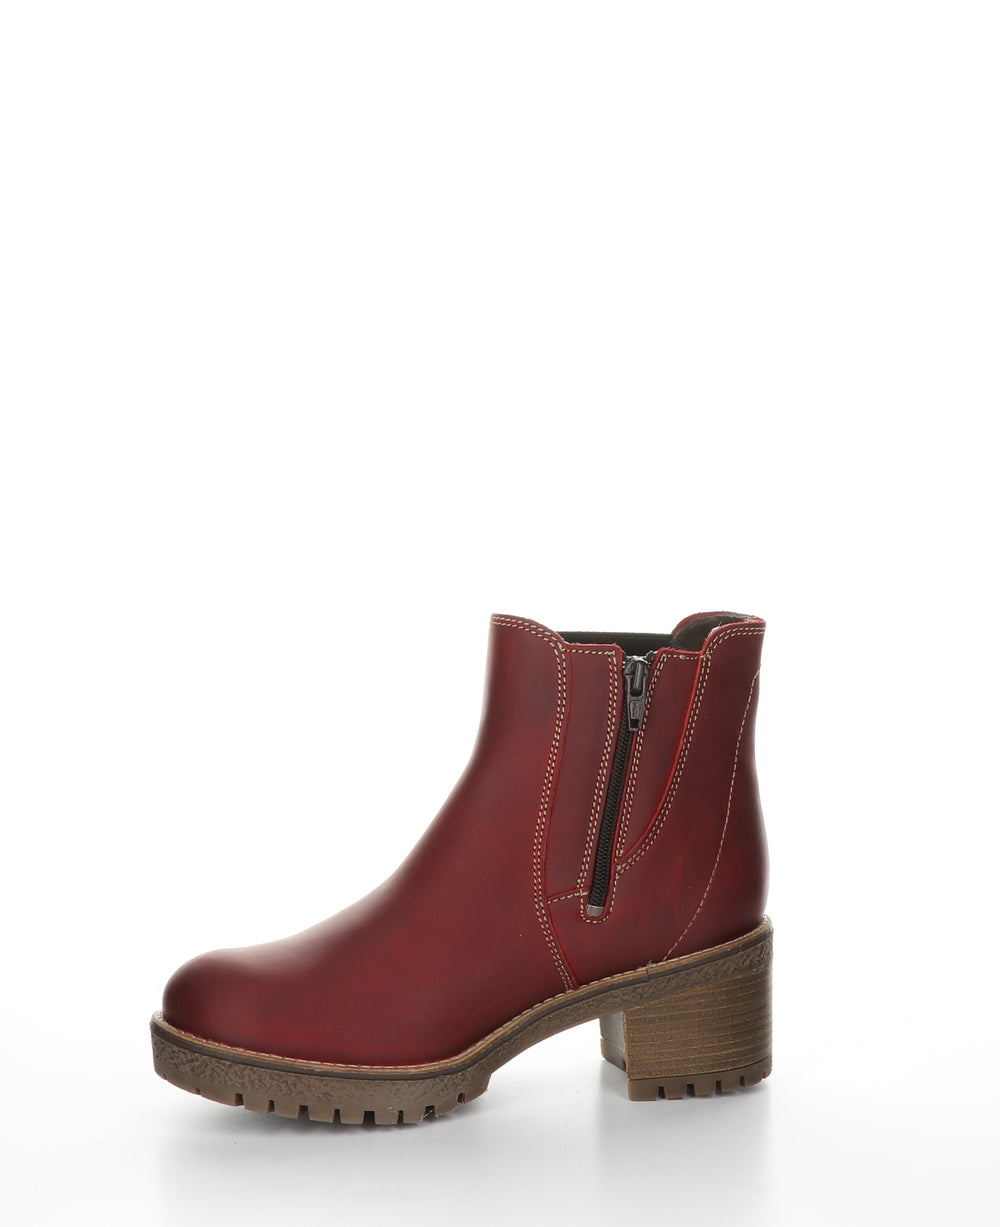 MASS Red Zip Up Ankle Boots|MASS Bottines avec Fermeture Zippée in Rouge